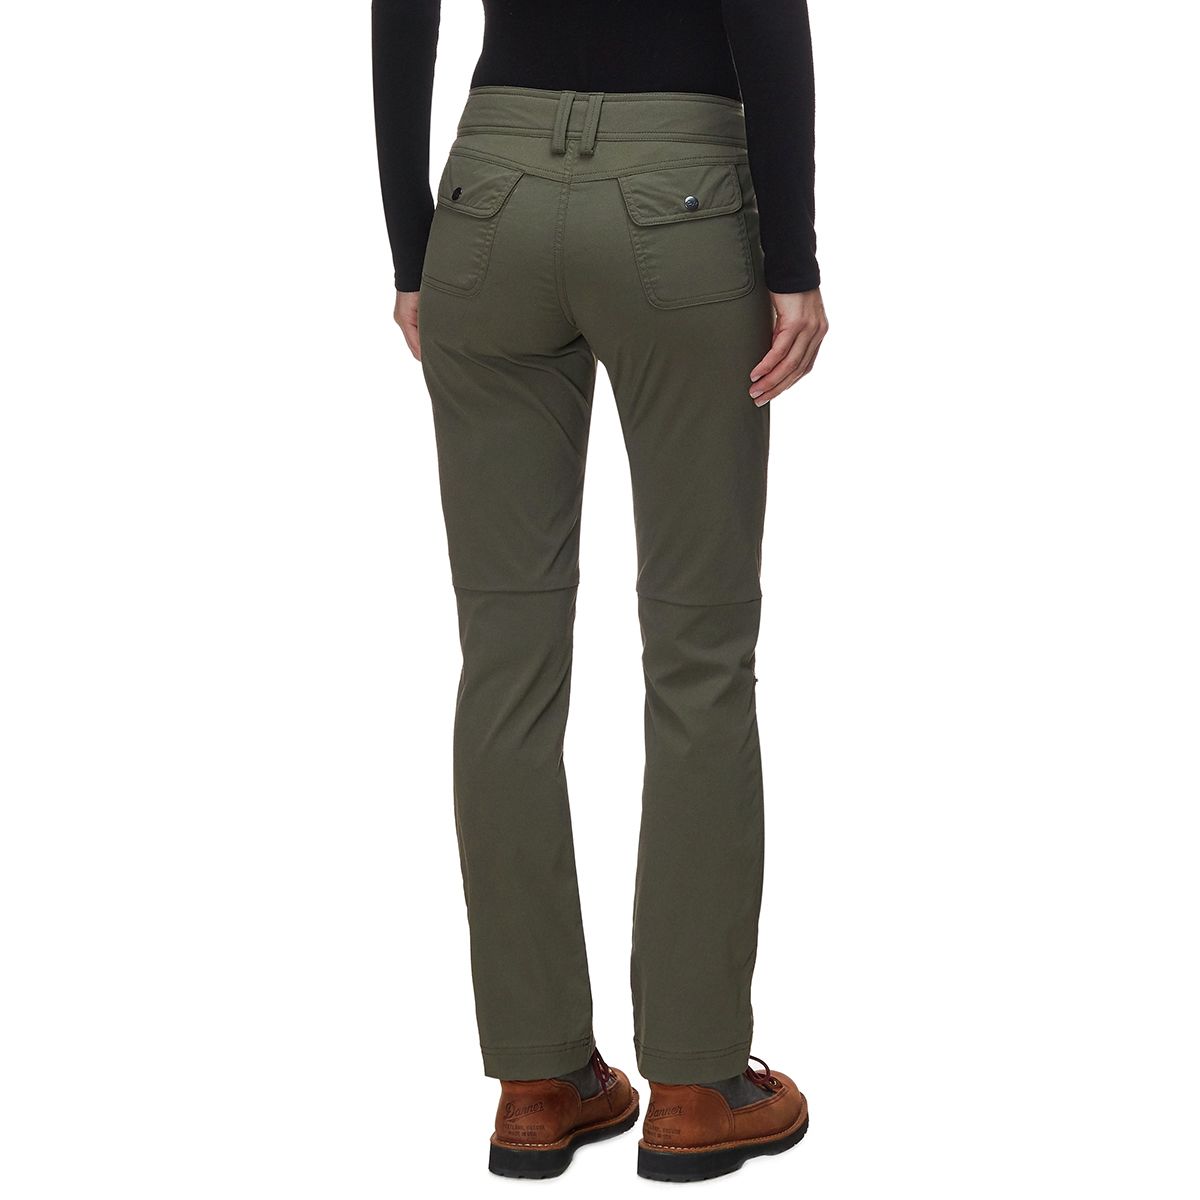 Outdoor Research Kickstep Roll Up Pant - Women's - Clothing